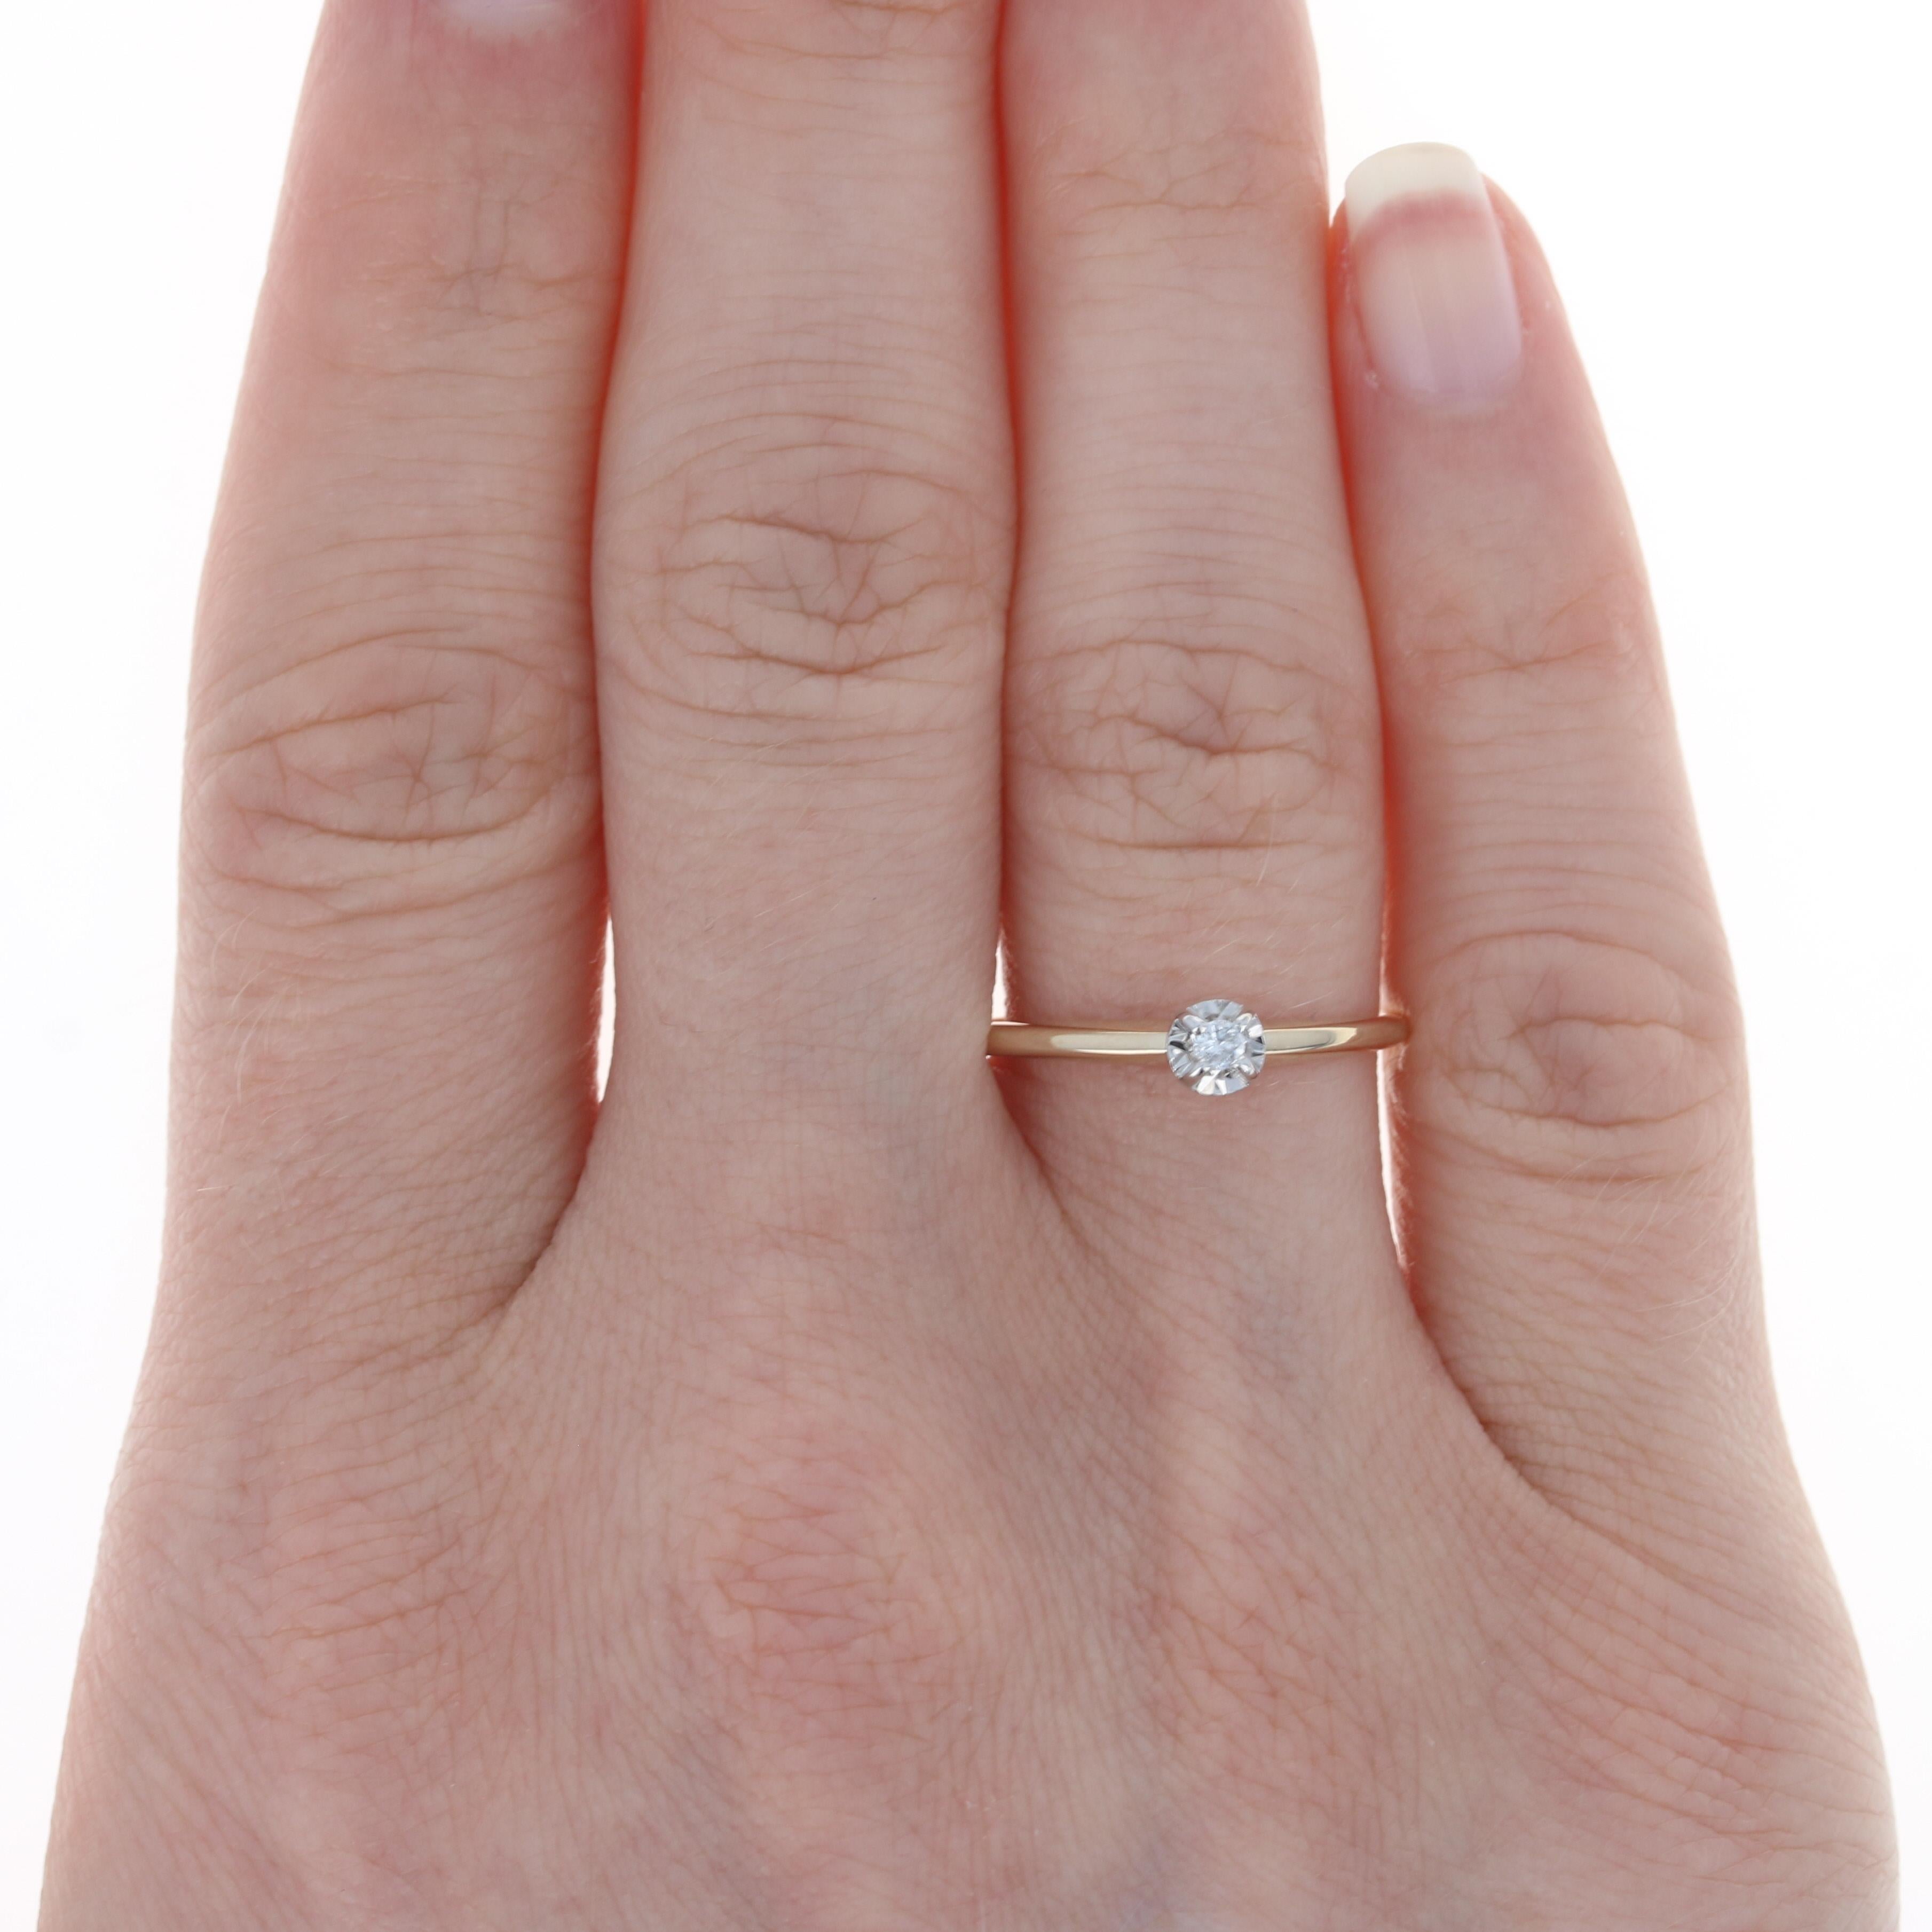 Size: 7 1/4
Sizing Fee: Down 4 sizes for $30 or up 2 sizes for $35

Metal Content: 14k Yellow Gold & 14k White Gold

Stone Information
Natural  Diamond
Carat: .05ct
Cut: Round Brilliant
Color: G
Clarity: I1

Style: Solitaire

Measurements
Face